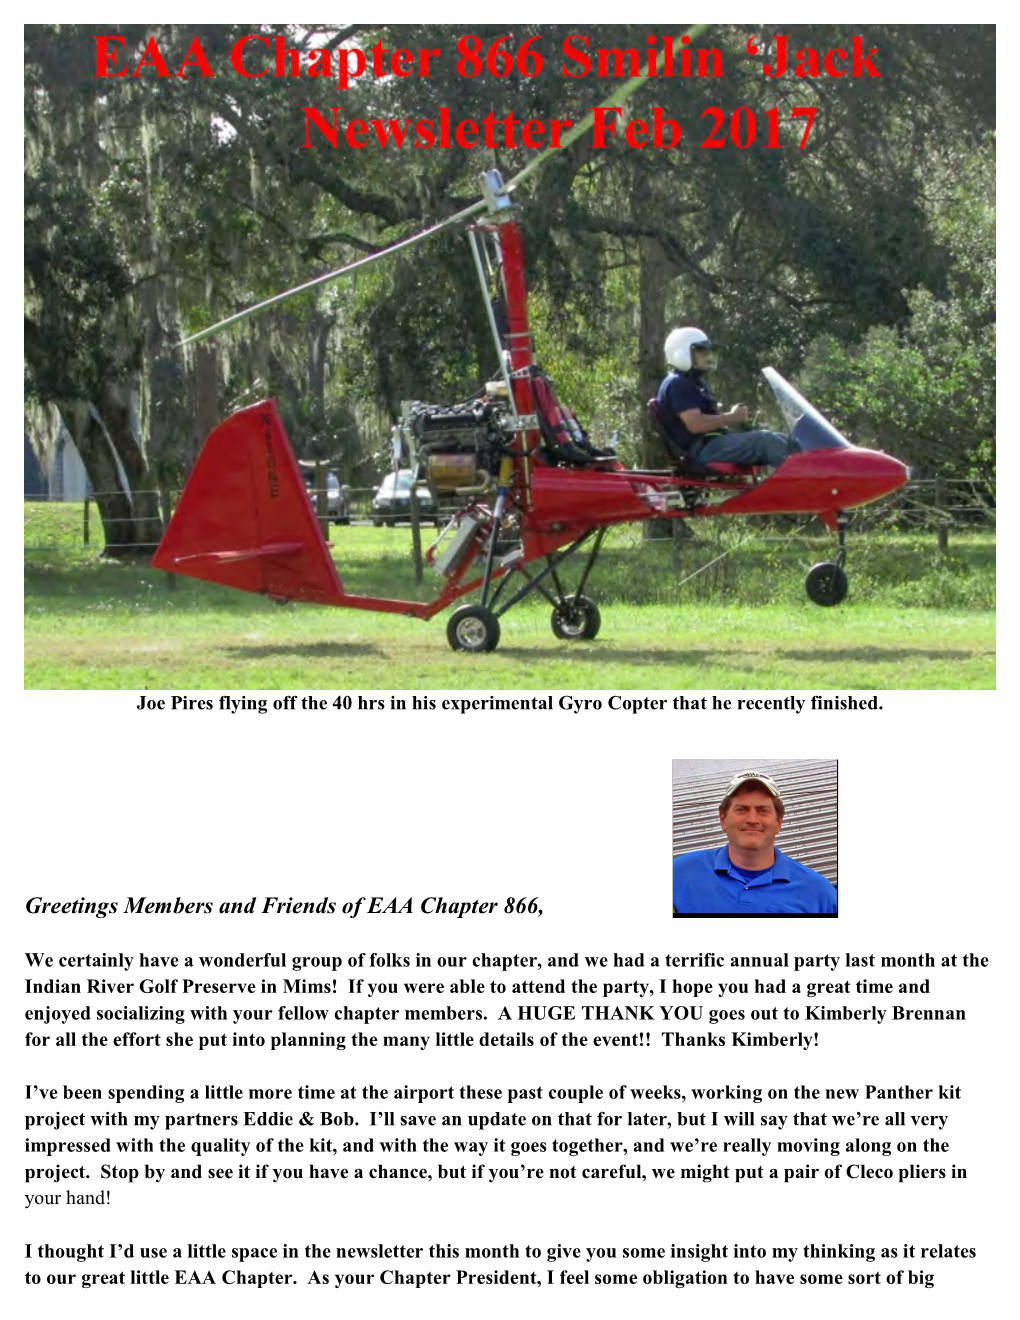 Greetings Members and Friends of EAA Chapter 866